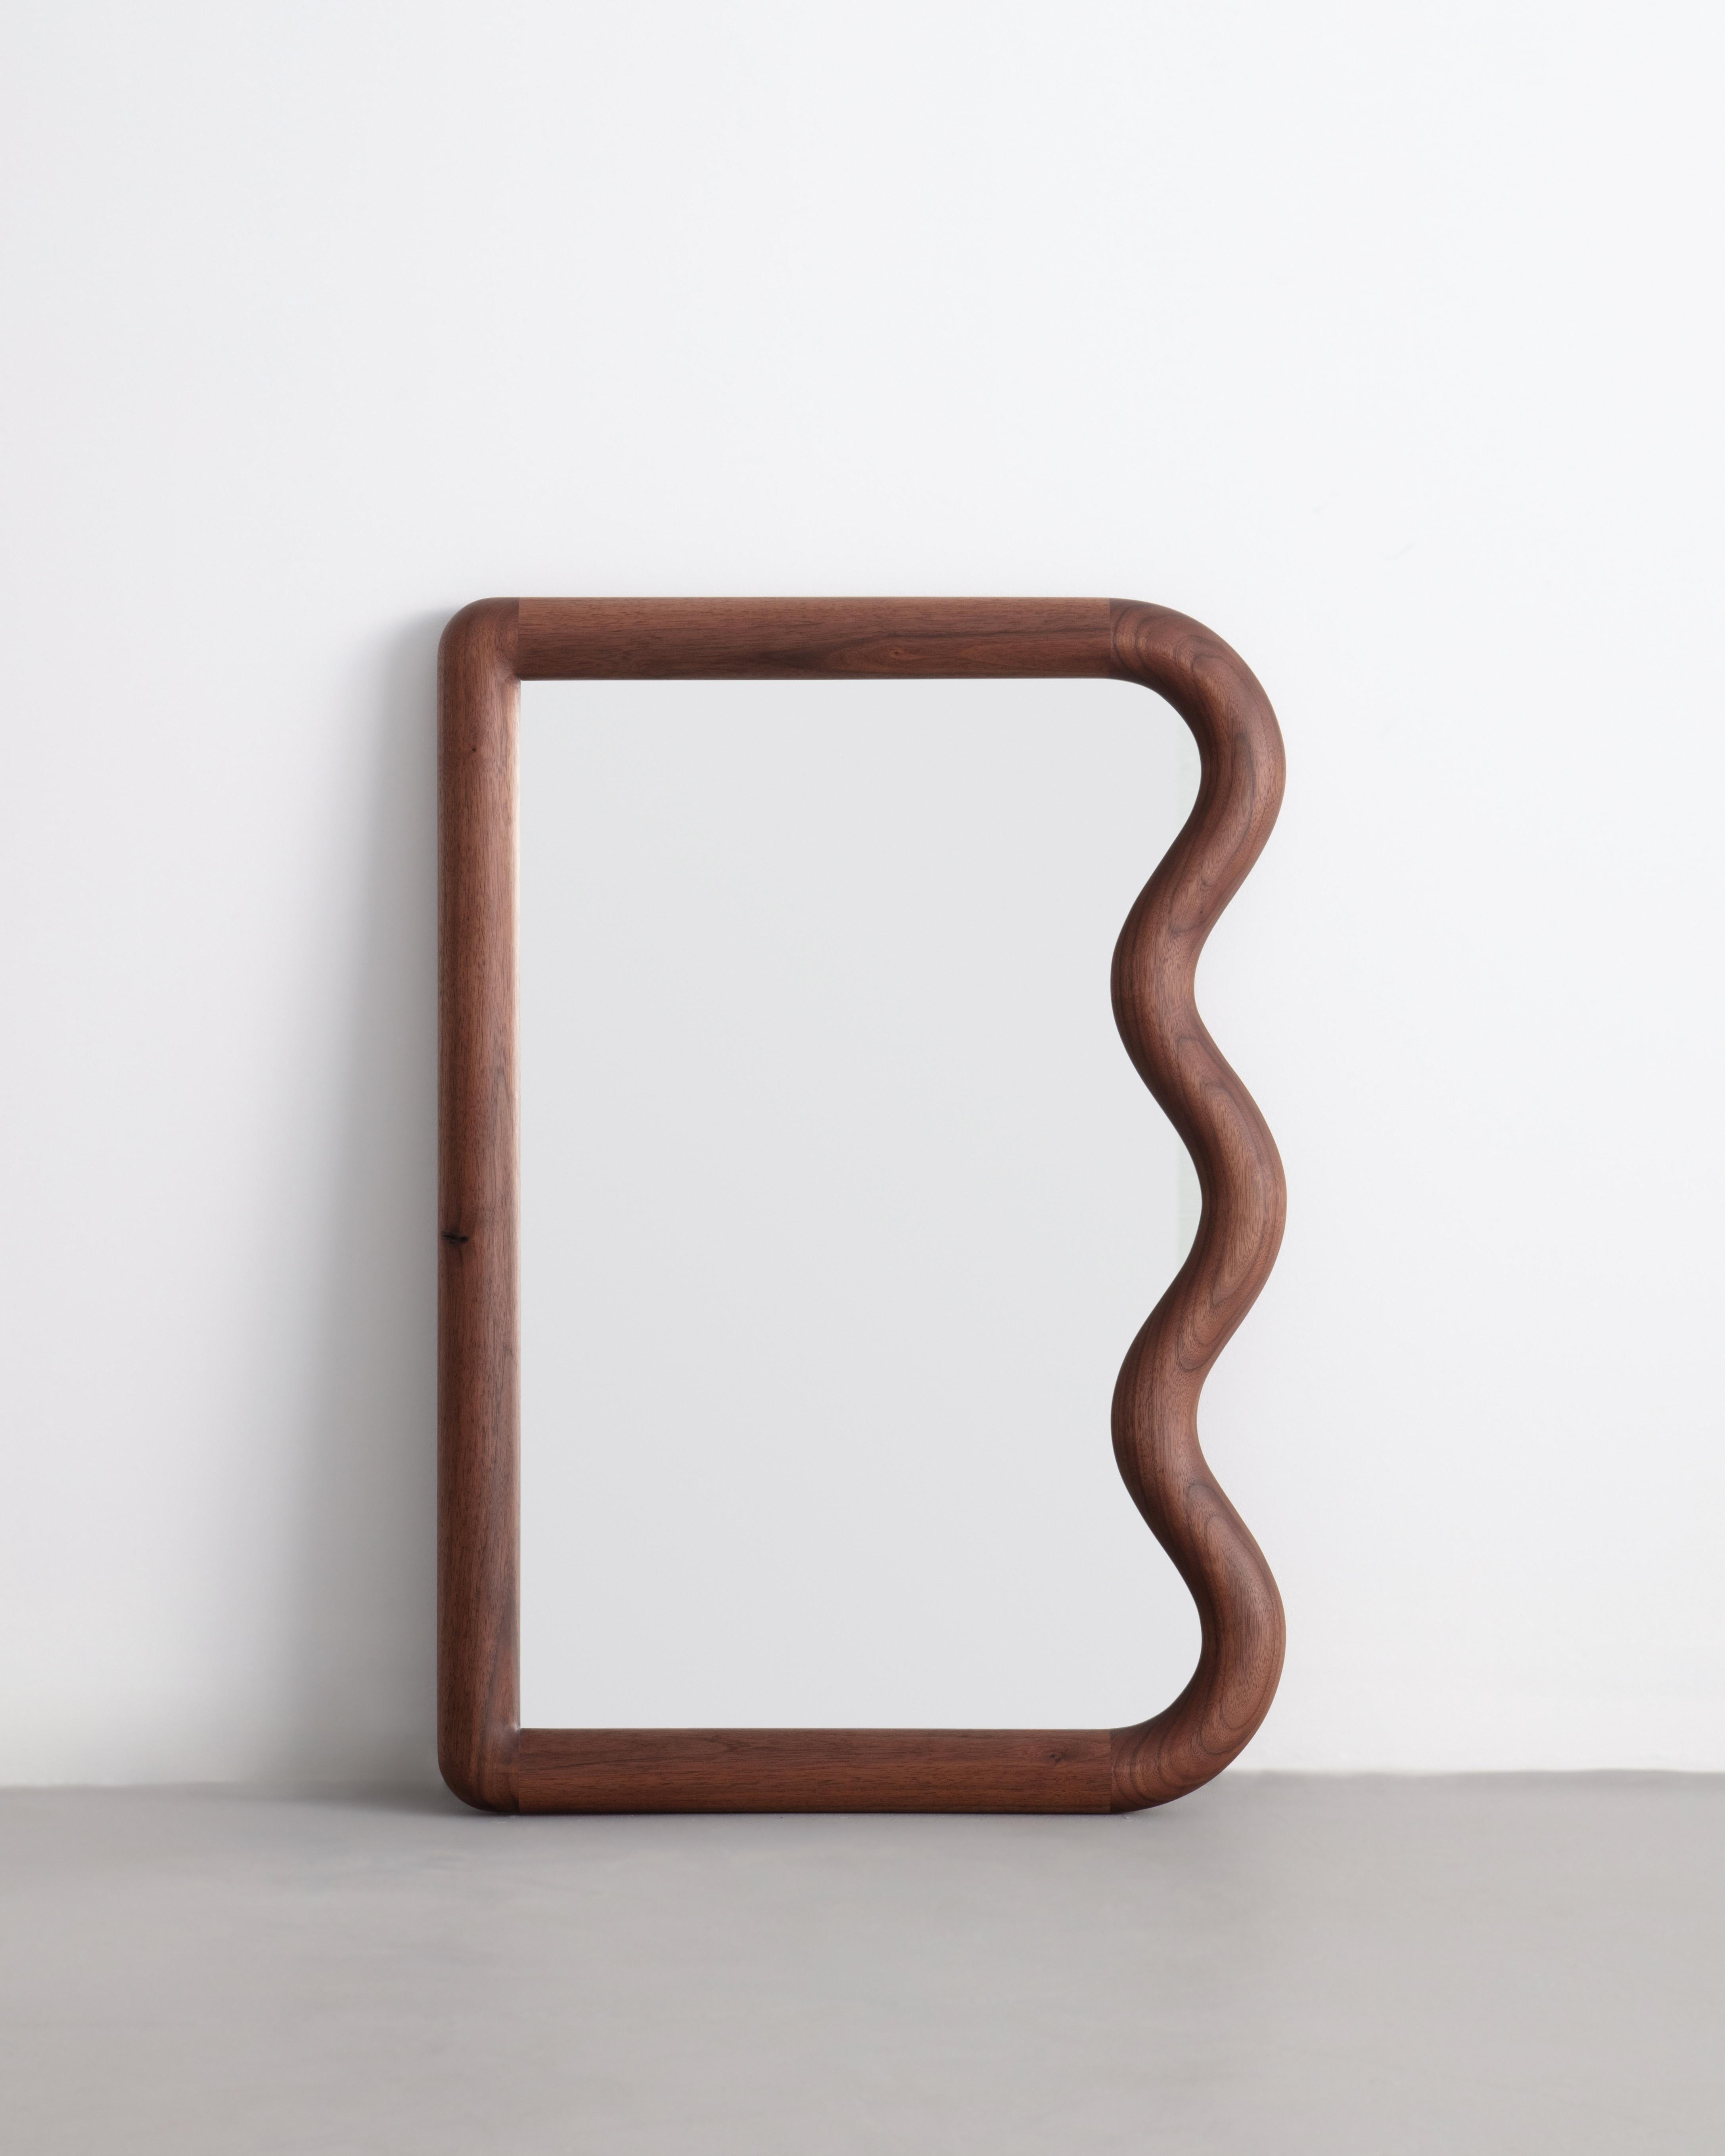 Constructed from Solid American Black Walnut this mini Squiggle Mirror is made to order. The mirror can be hung vertically by its custom french cleat.

Mirror can be placed leaning or hung.